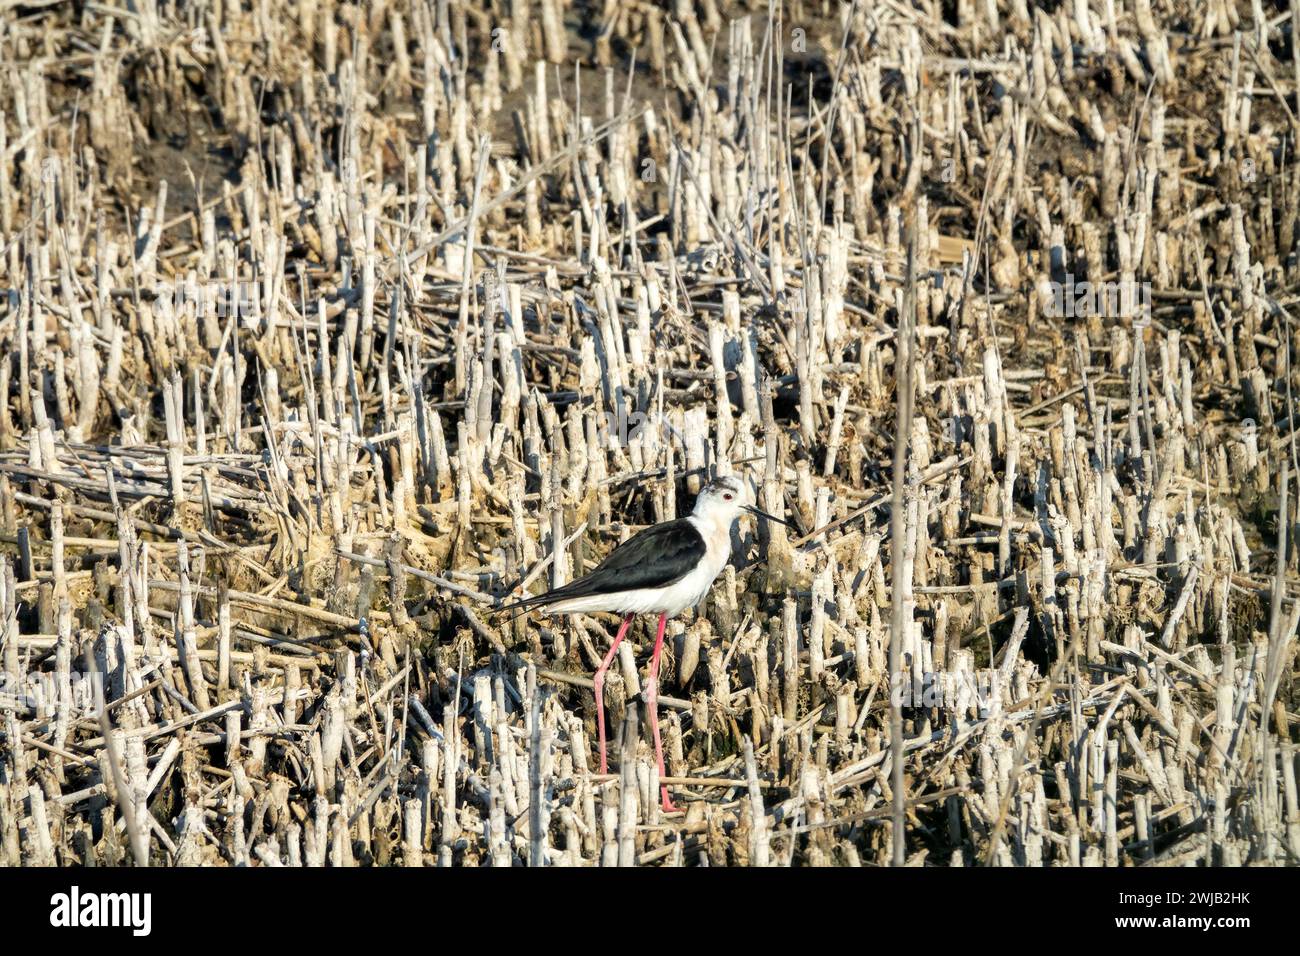 Black-winged stilts (Himantopus himantopus) as inhabitants of heavily polluted water bodies (sewage fields, waste landfill deposit) within human settl Stock Photo